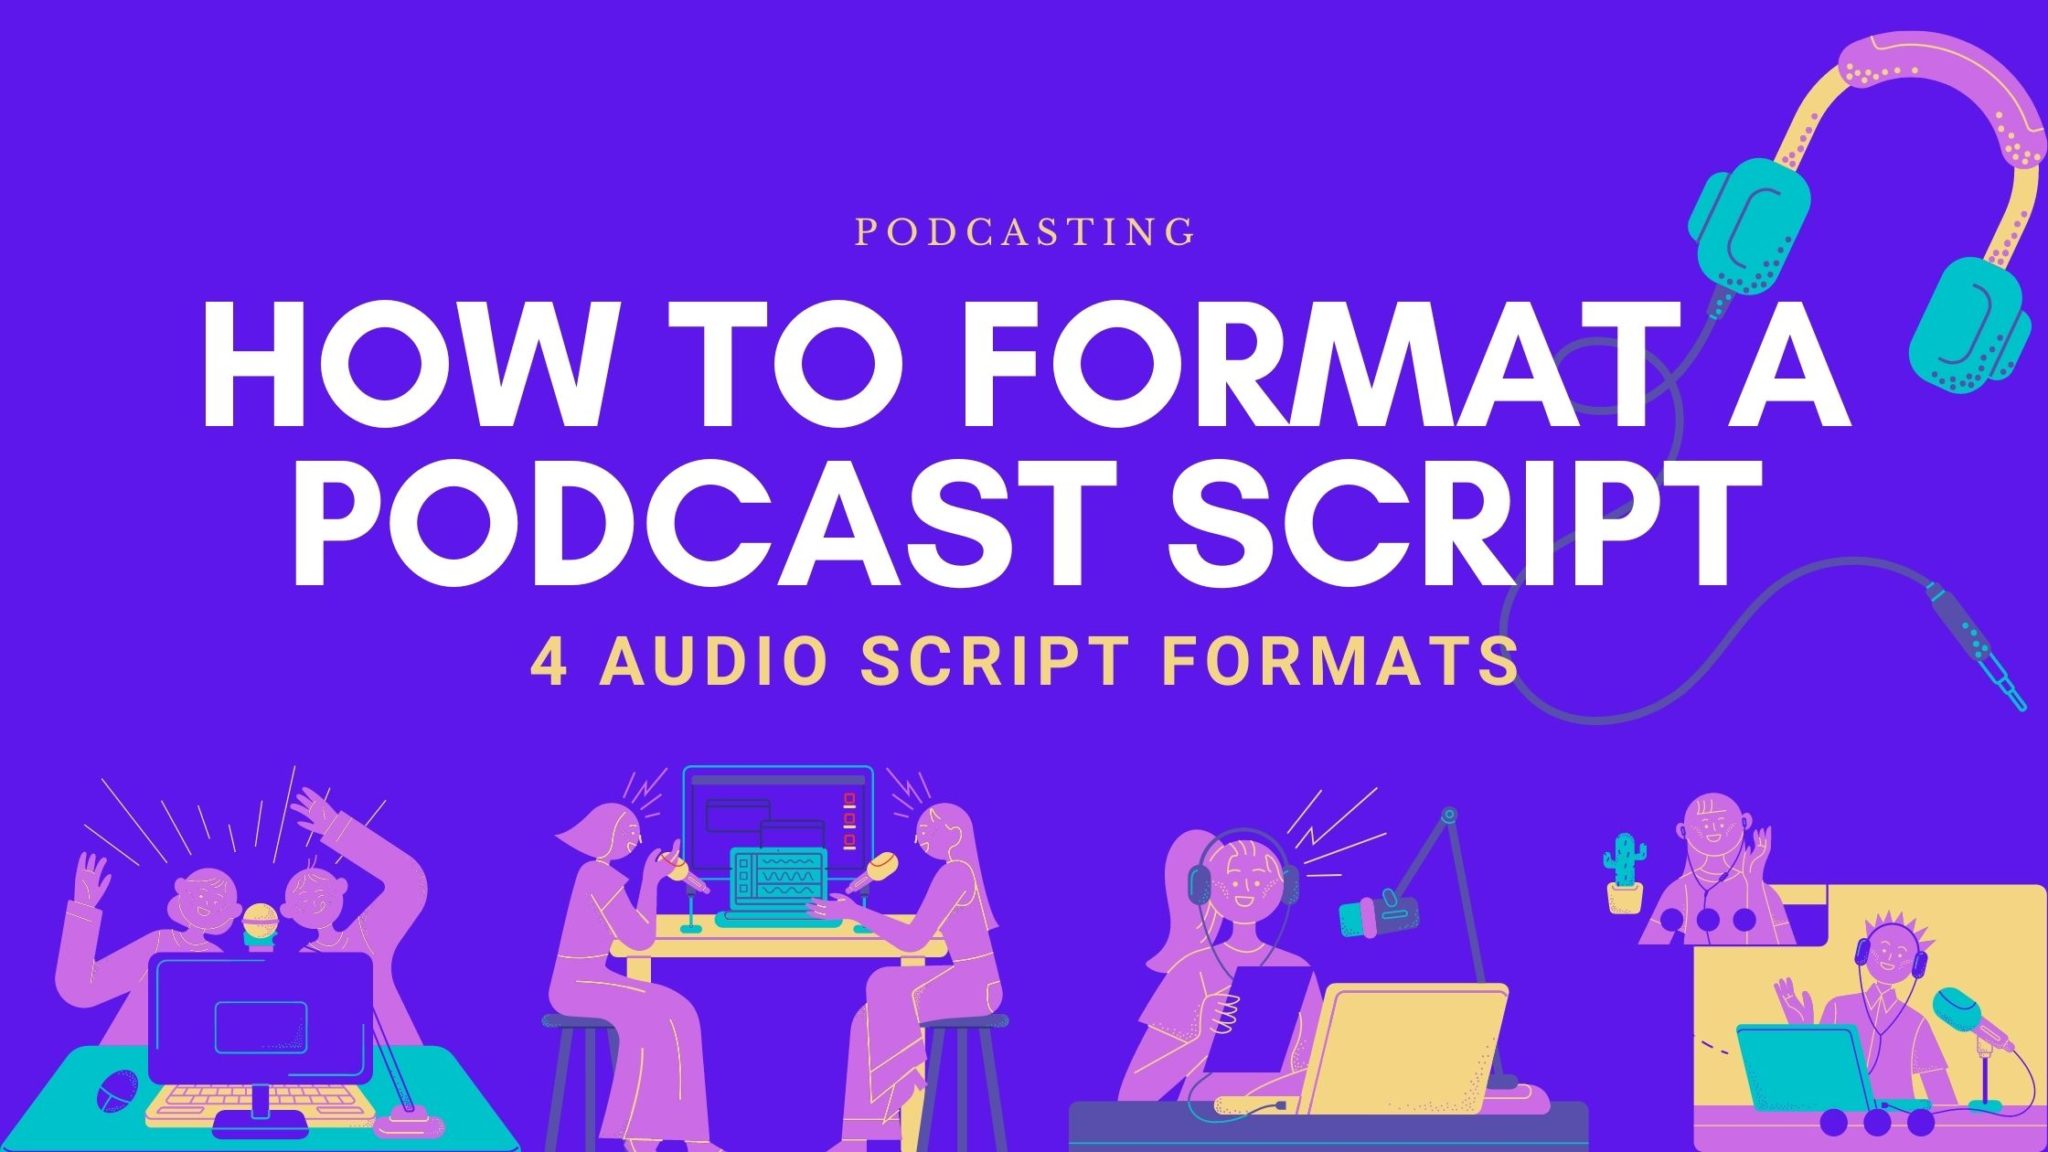 How to Write a Podcast: 23 Ways to Format a Podcast Script